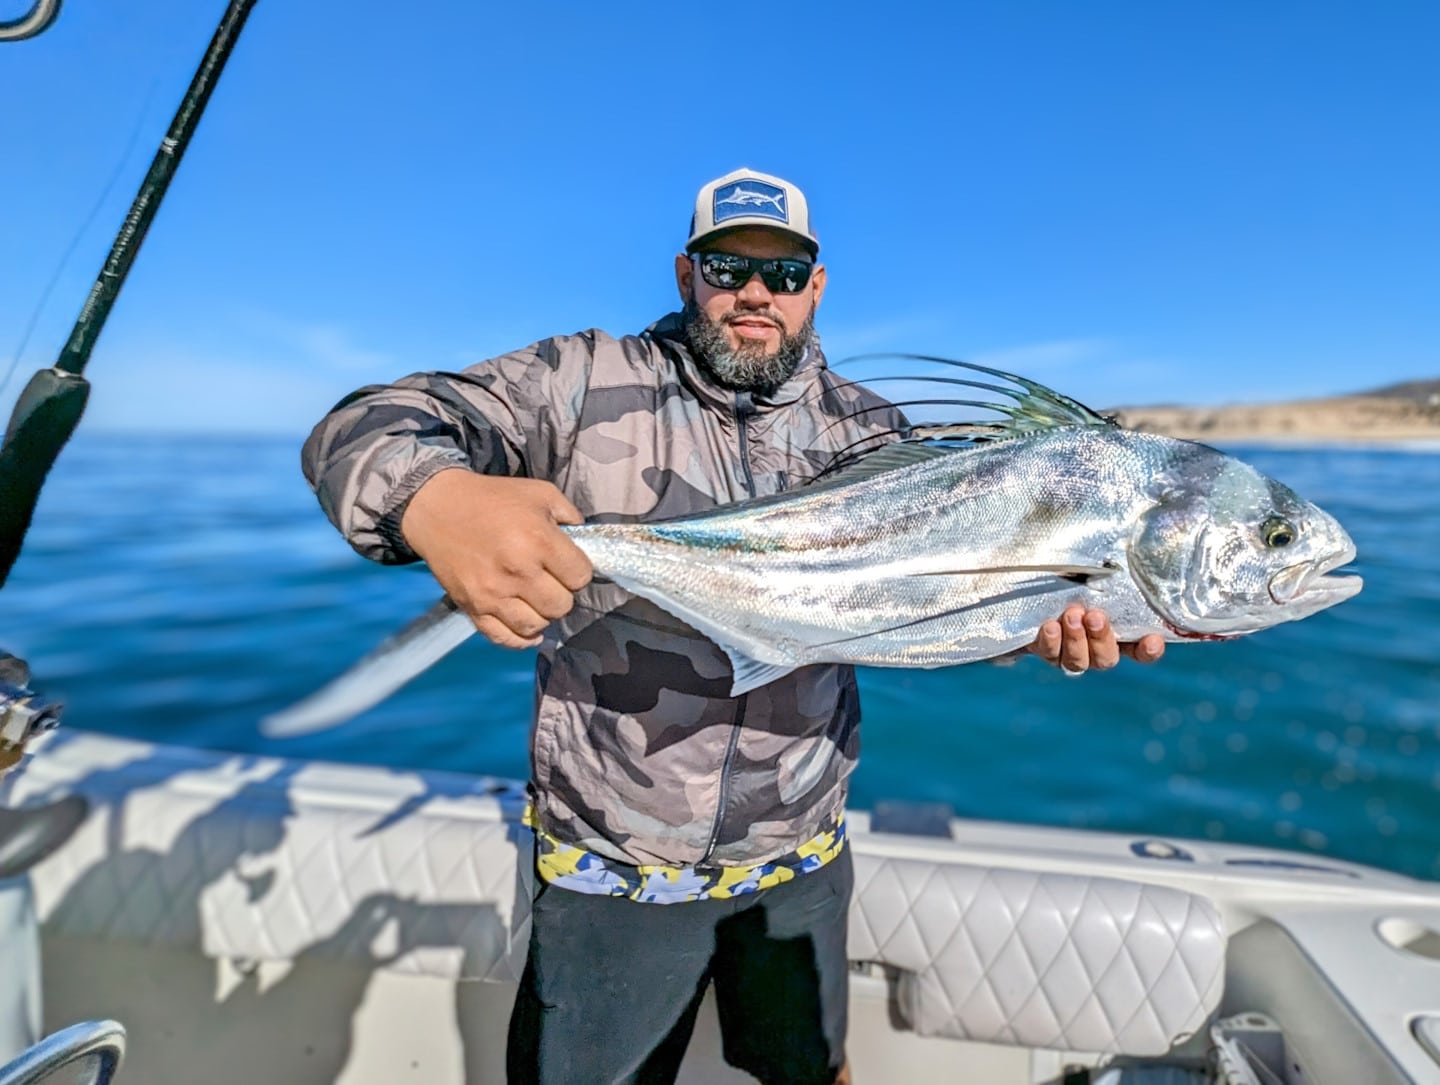 Capt. Arturo Chacon from Tag Cabo Sportfishing in Cabo San Lucas, BCS, Mexico with a roosterfish